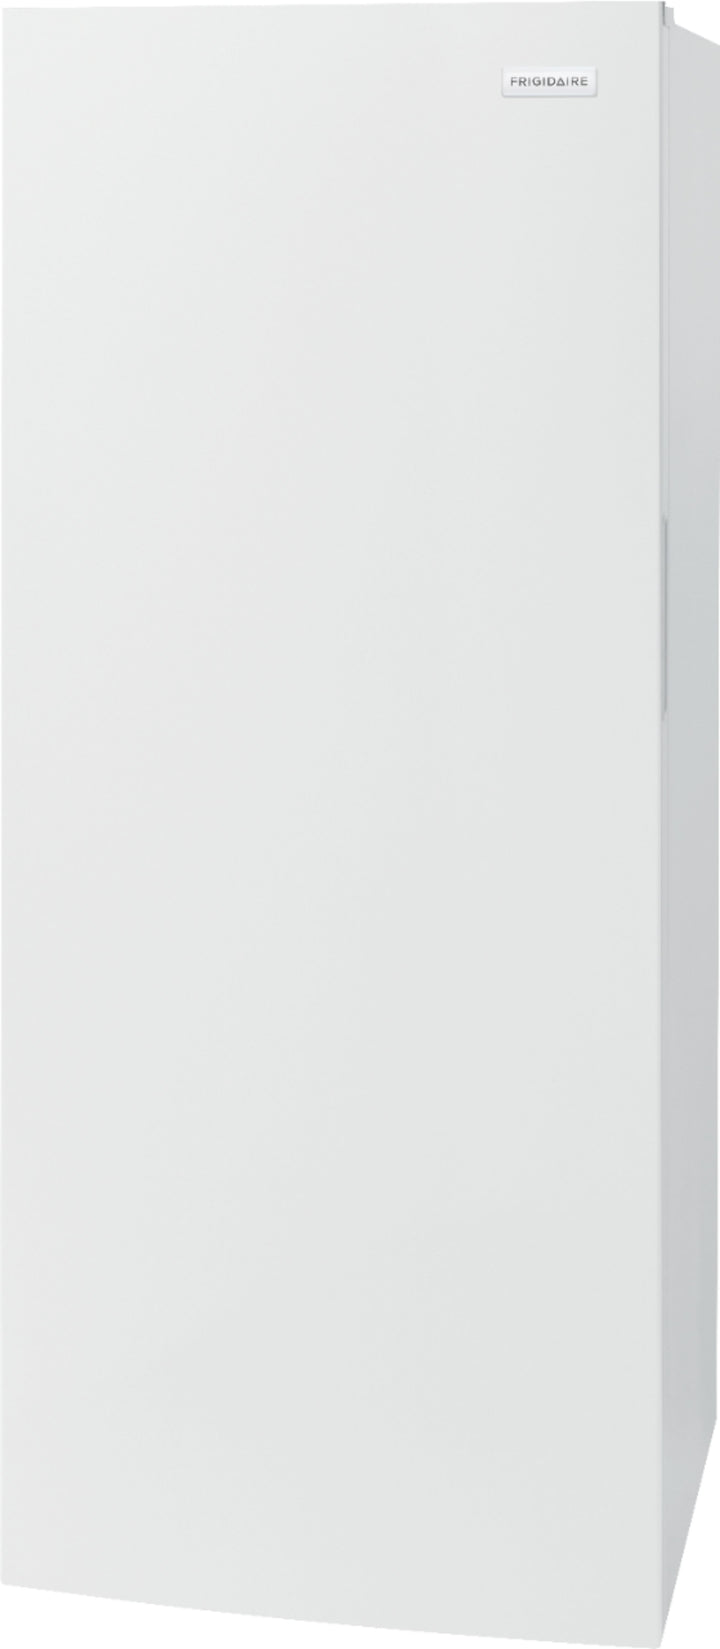 Frigidaire - 13.0 Cu. Ft. Frost-Free Upright Freezer with Interior Light - White_2